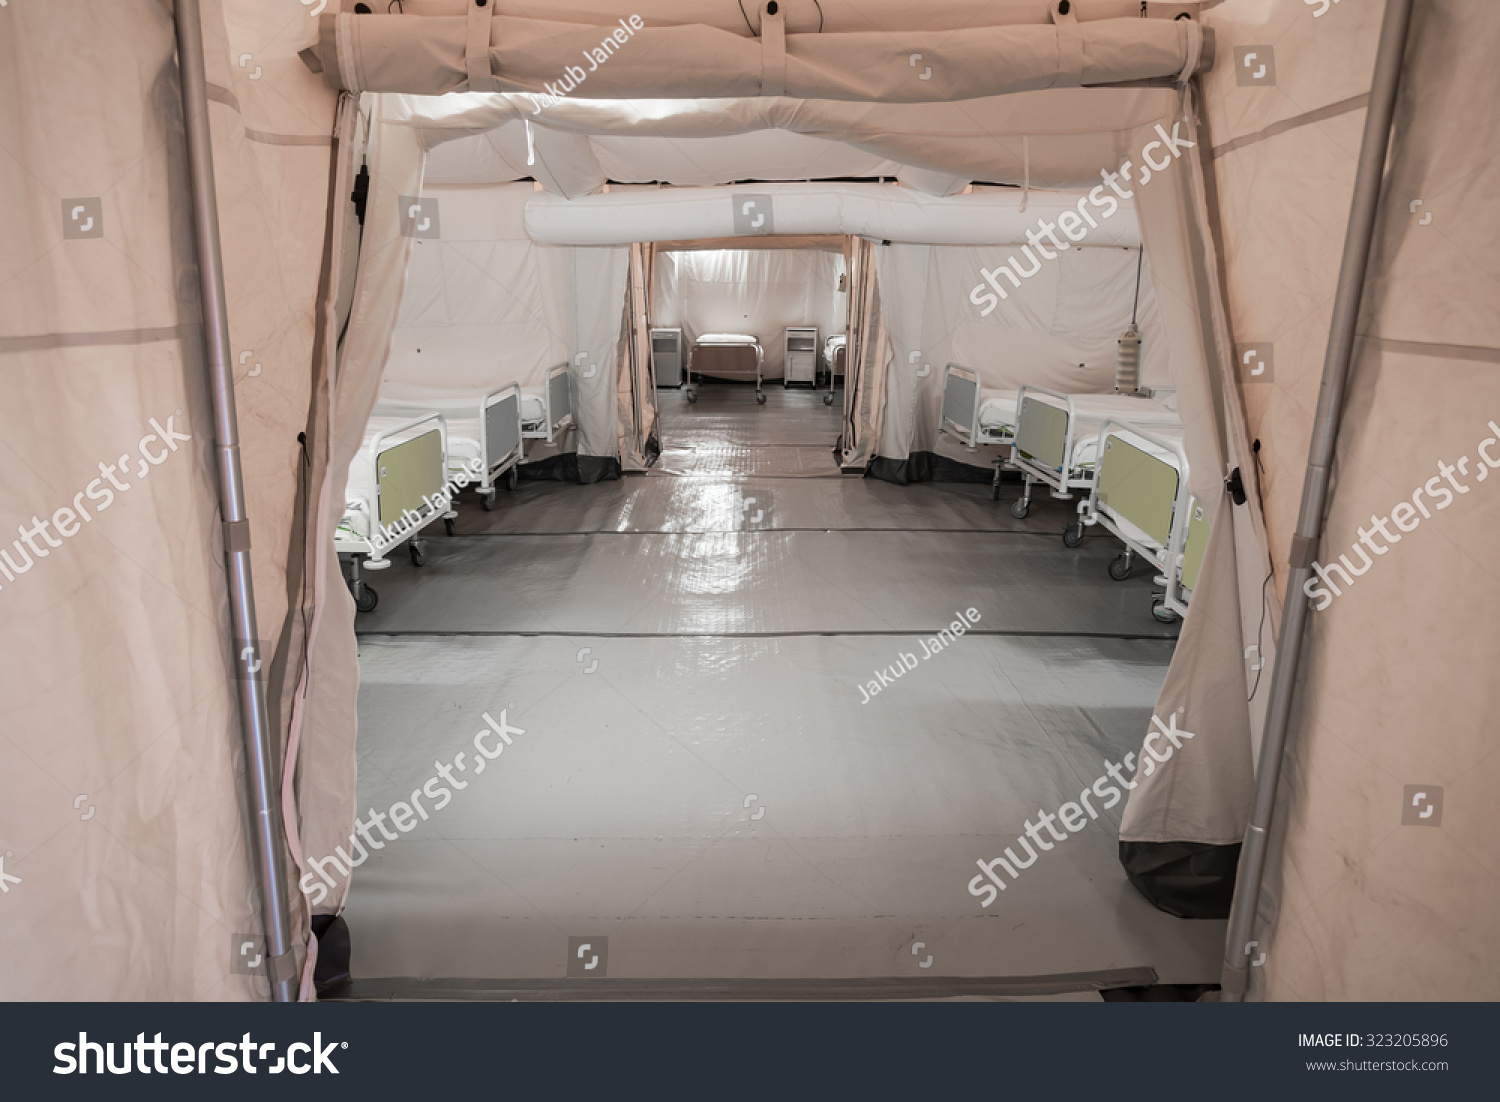 642 Military medical tent Images, Stock Photos & Vectors | Shutterstock